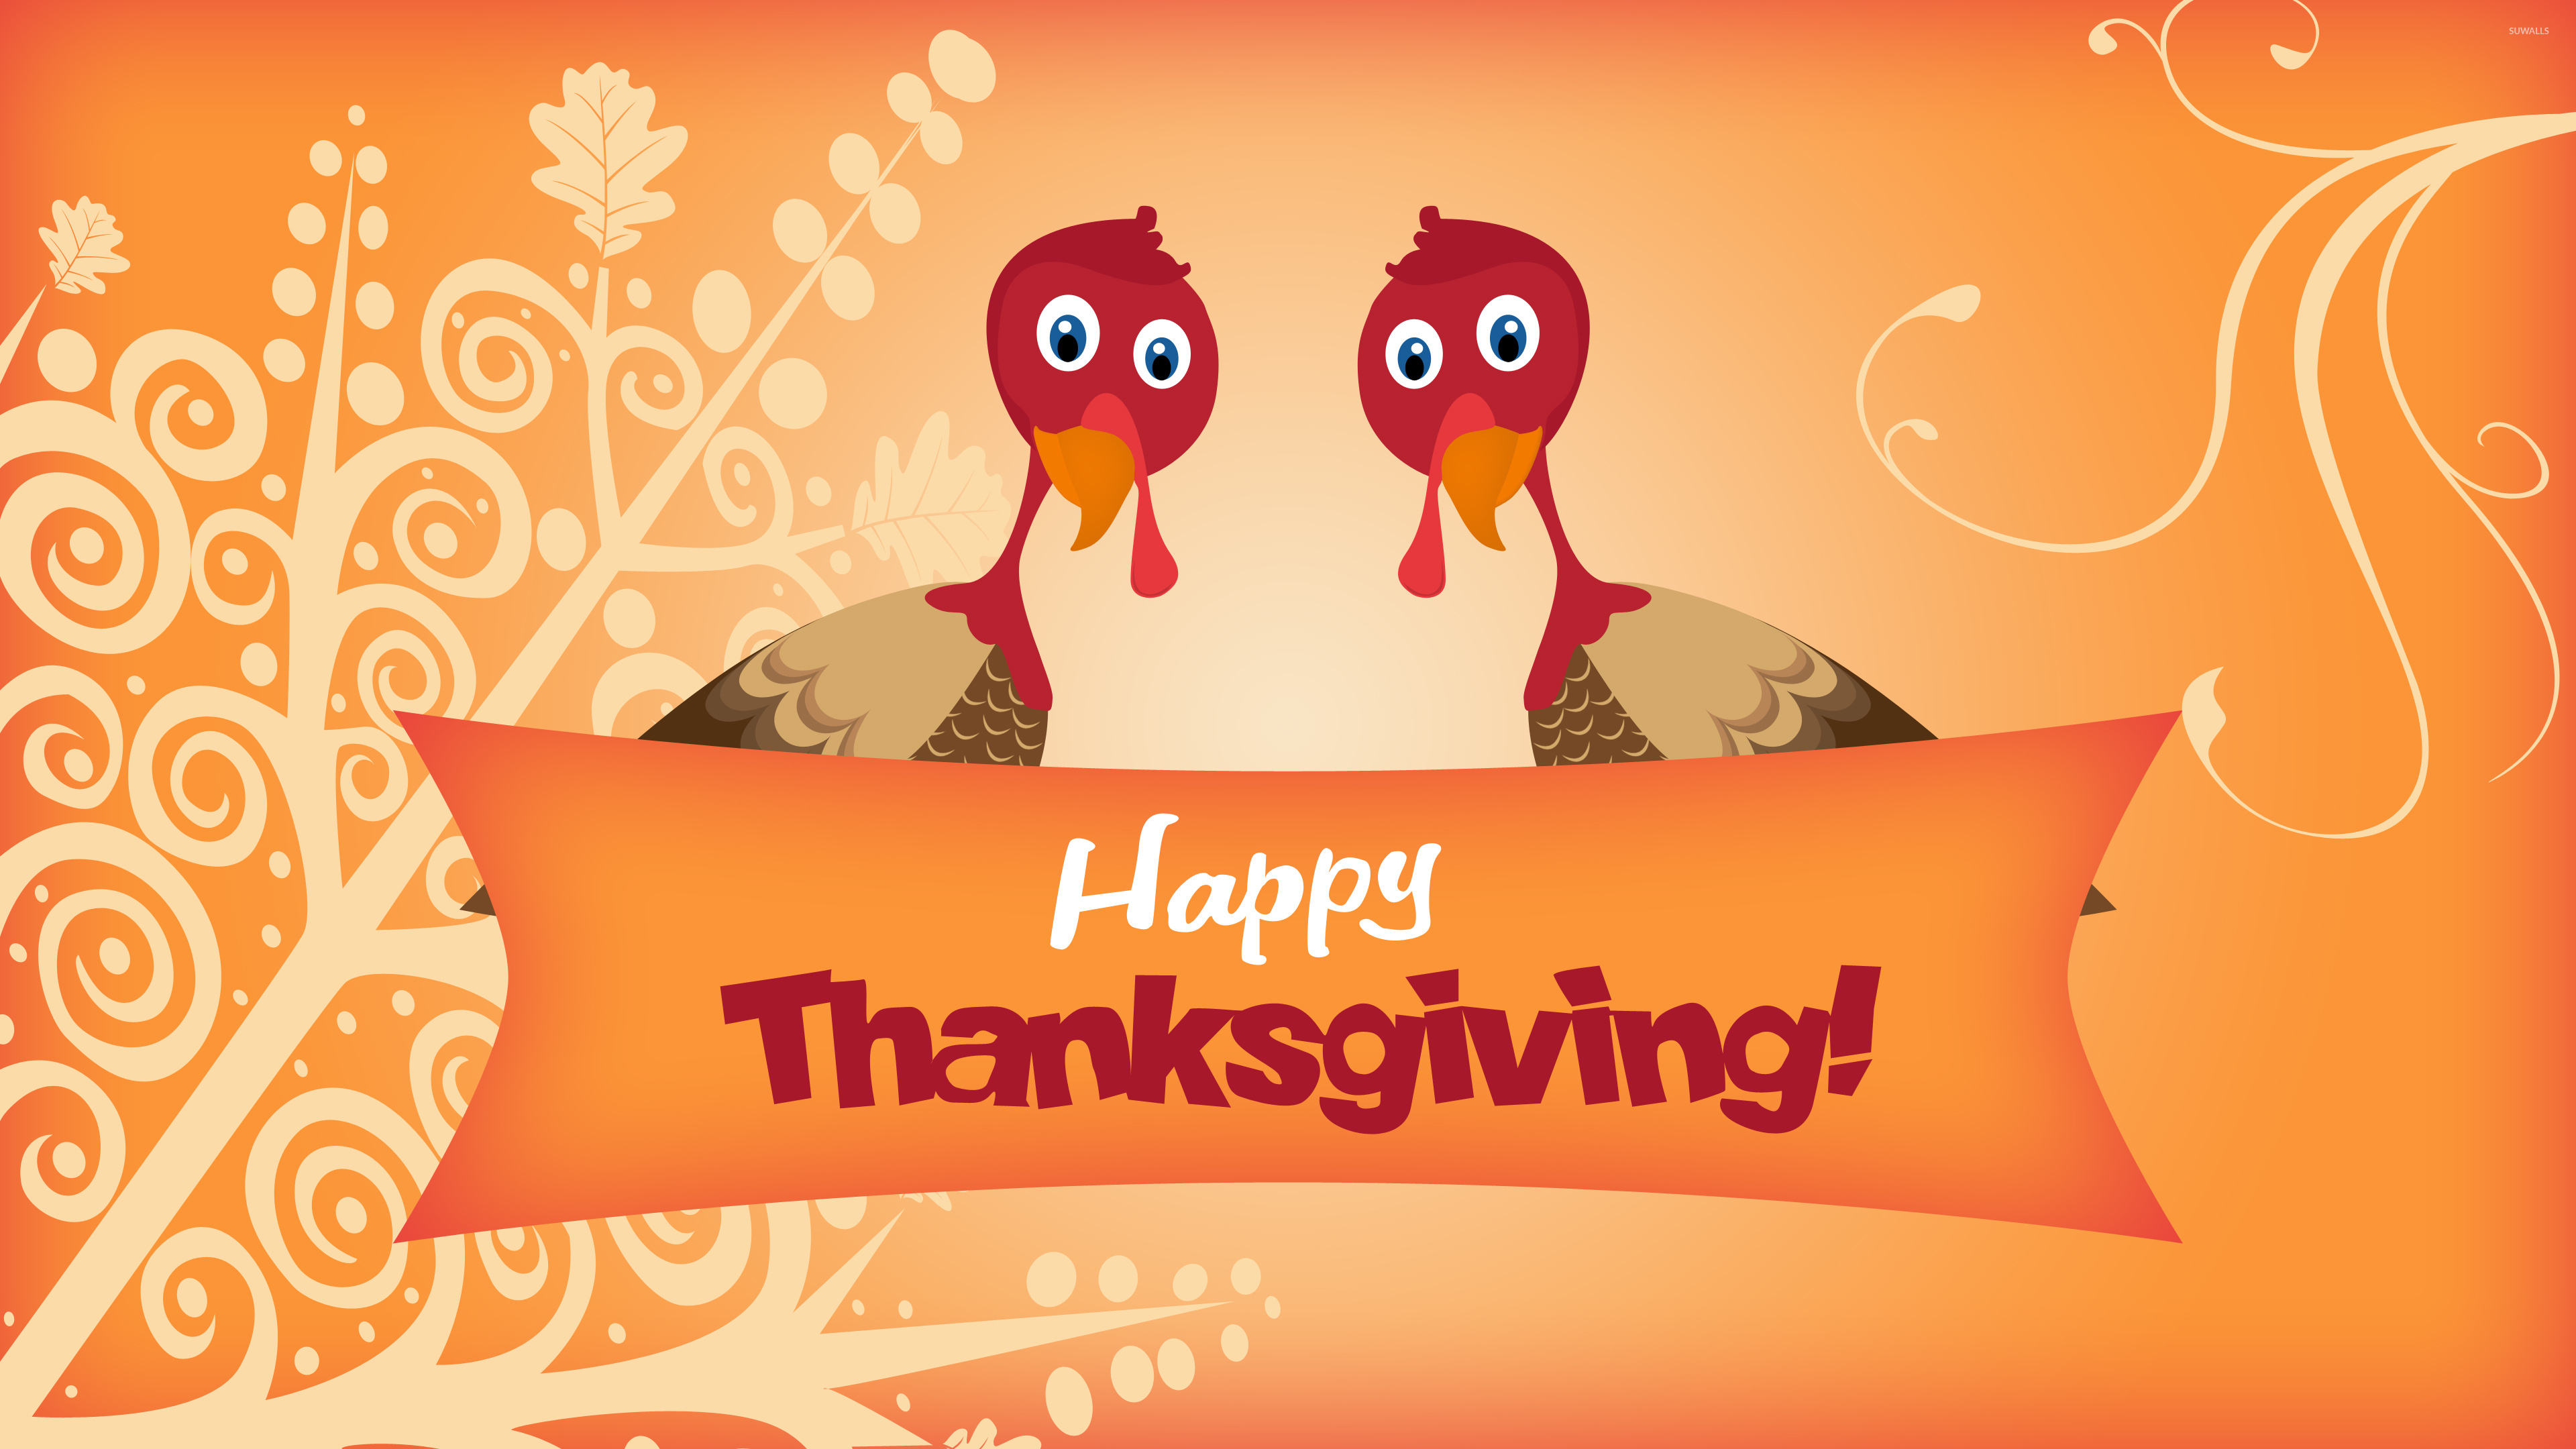 Free download 61] Happy Thanksgiving Wallpapers on [3840x2160] for your